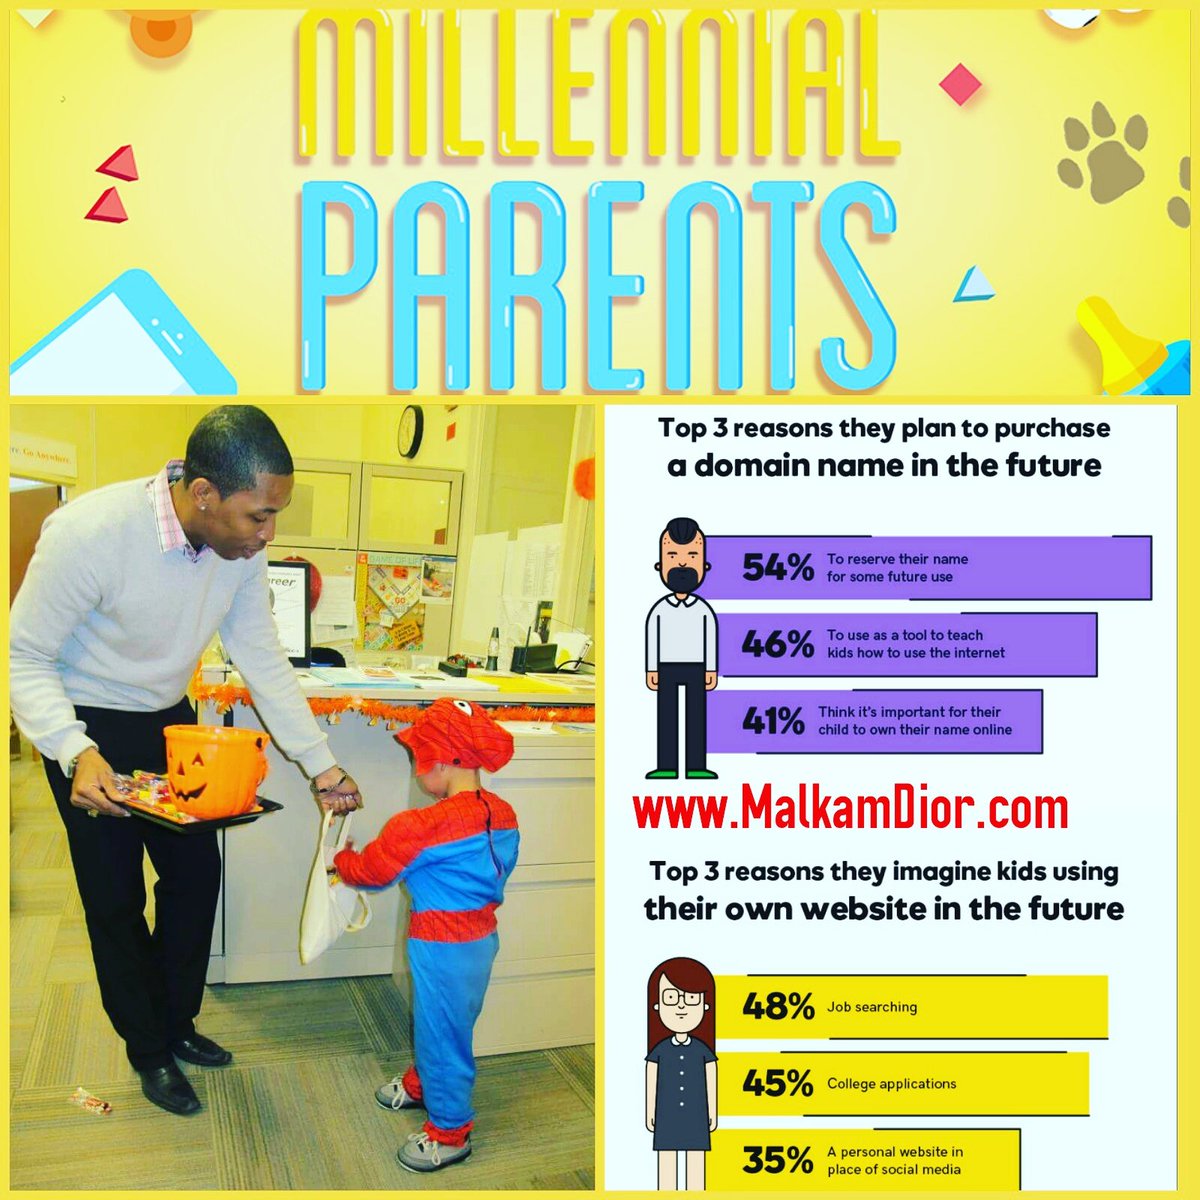 Are you #marketing to #millennial parents? 🦄😎 here's 4 tips to attract more  #millennials to your business! #seo

MalkamDior.com

#millennialpink #millennialtalk #millennialmillionaires #marketing  #millennialparenting #Innovation #millennialparents #friyay